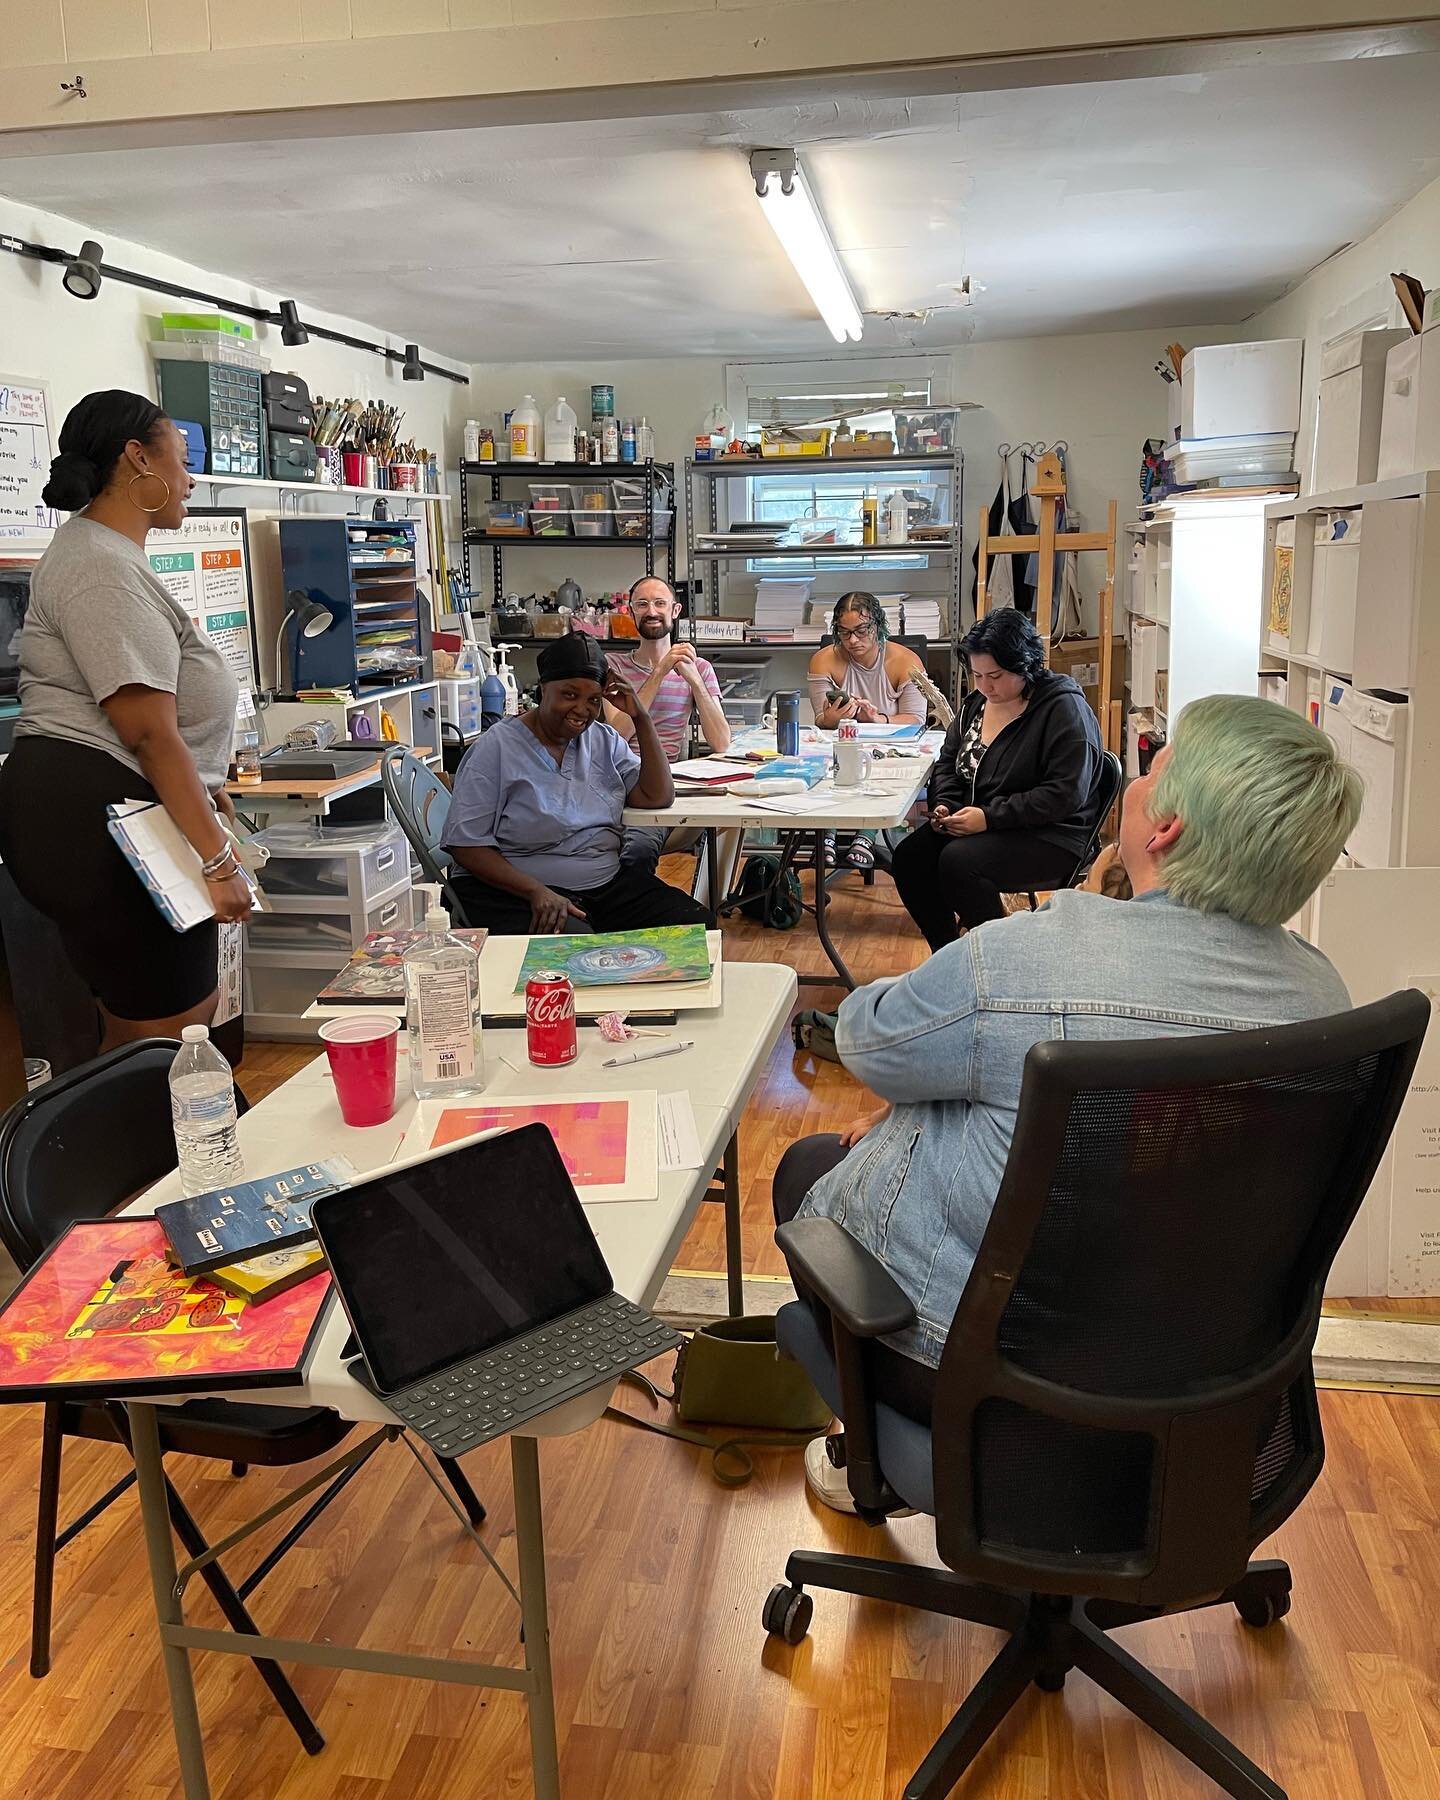 In July 2022, we held an Artist Orientation where we welcomed seven new artists into our Collective. For the last couple months, they&rsquo;ve been creating art and working towards our New Artist Showcase this September! 

Today we met together to di